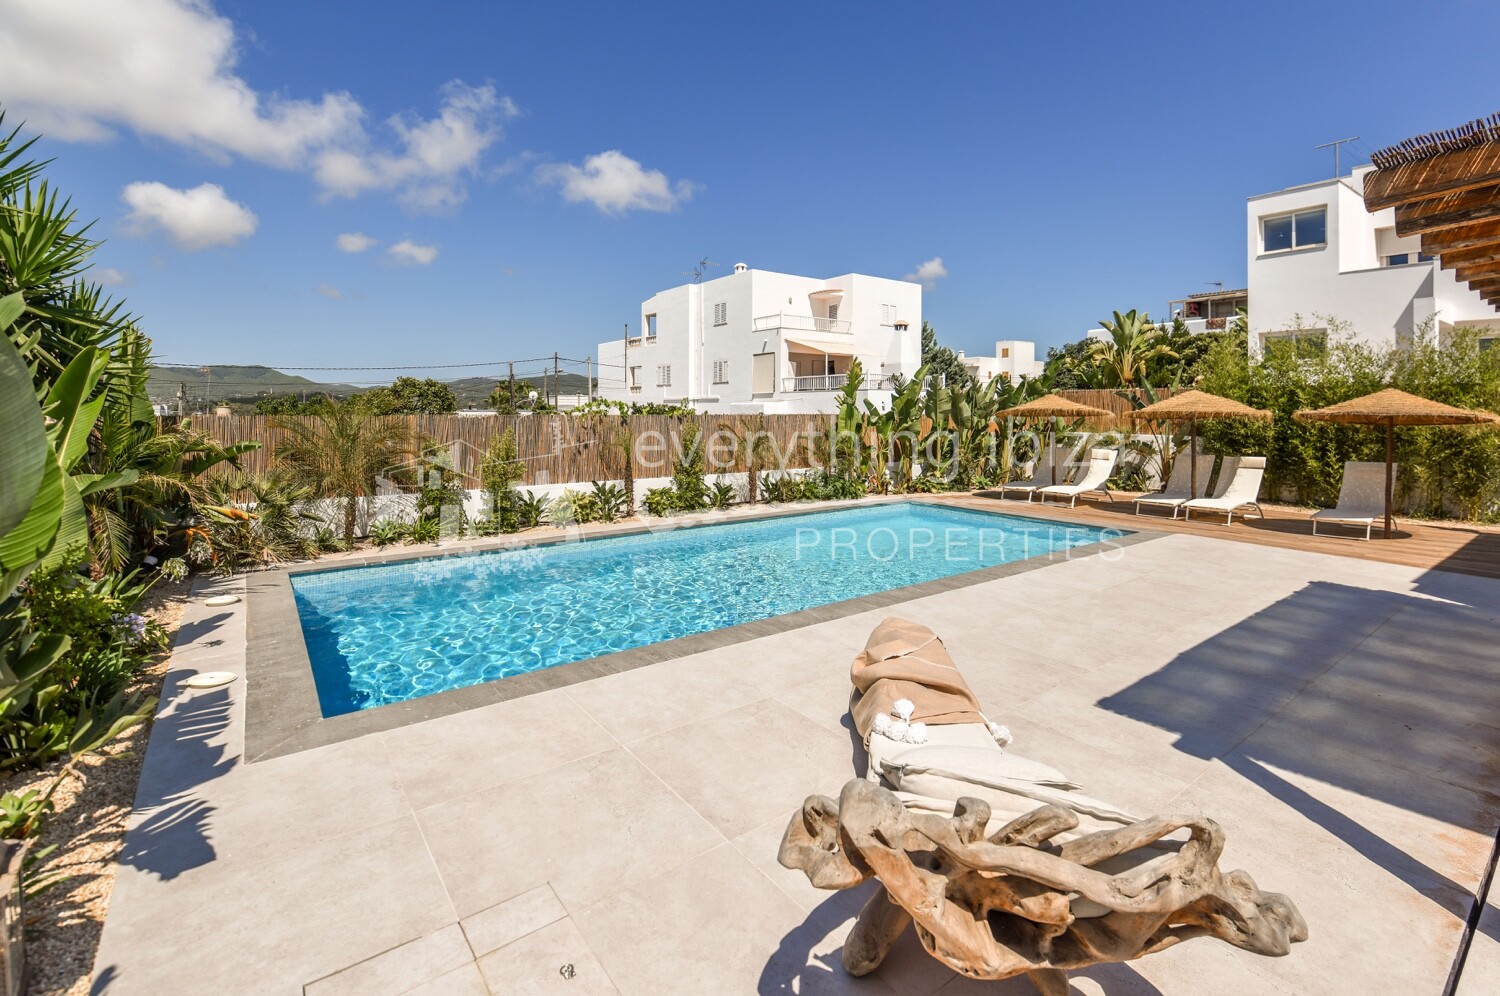 Magnificent Modern Villa in Super Location with Tourist License, ref. 1618, for sale in Ibiza by everything ibiza Properties